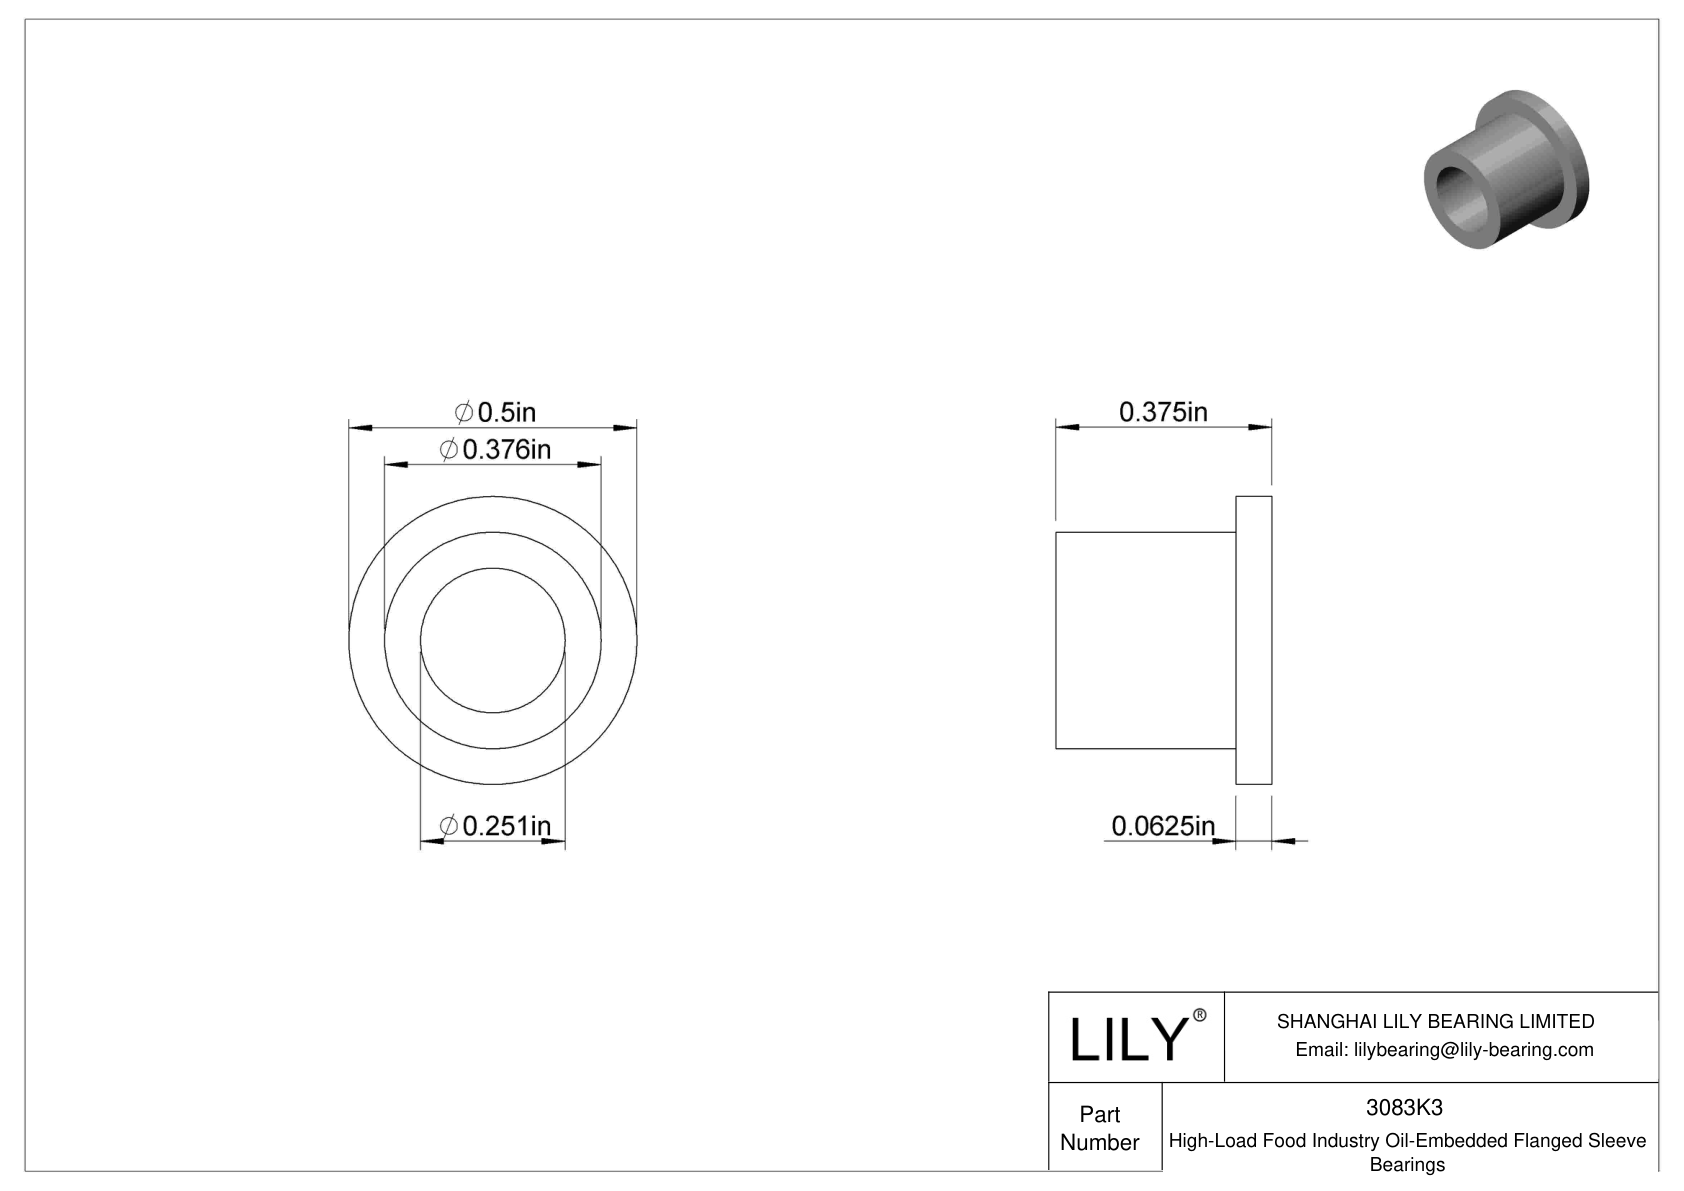 DAIDKD High-Load Food Industry Oil-Embedded Flanged Sleeve Bearings cad drawing